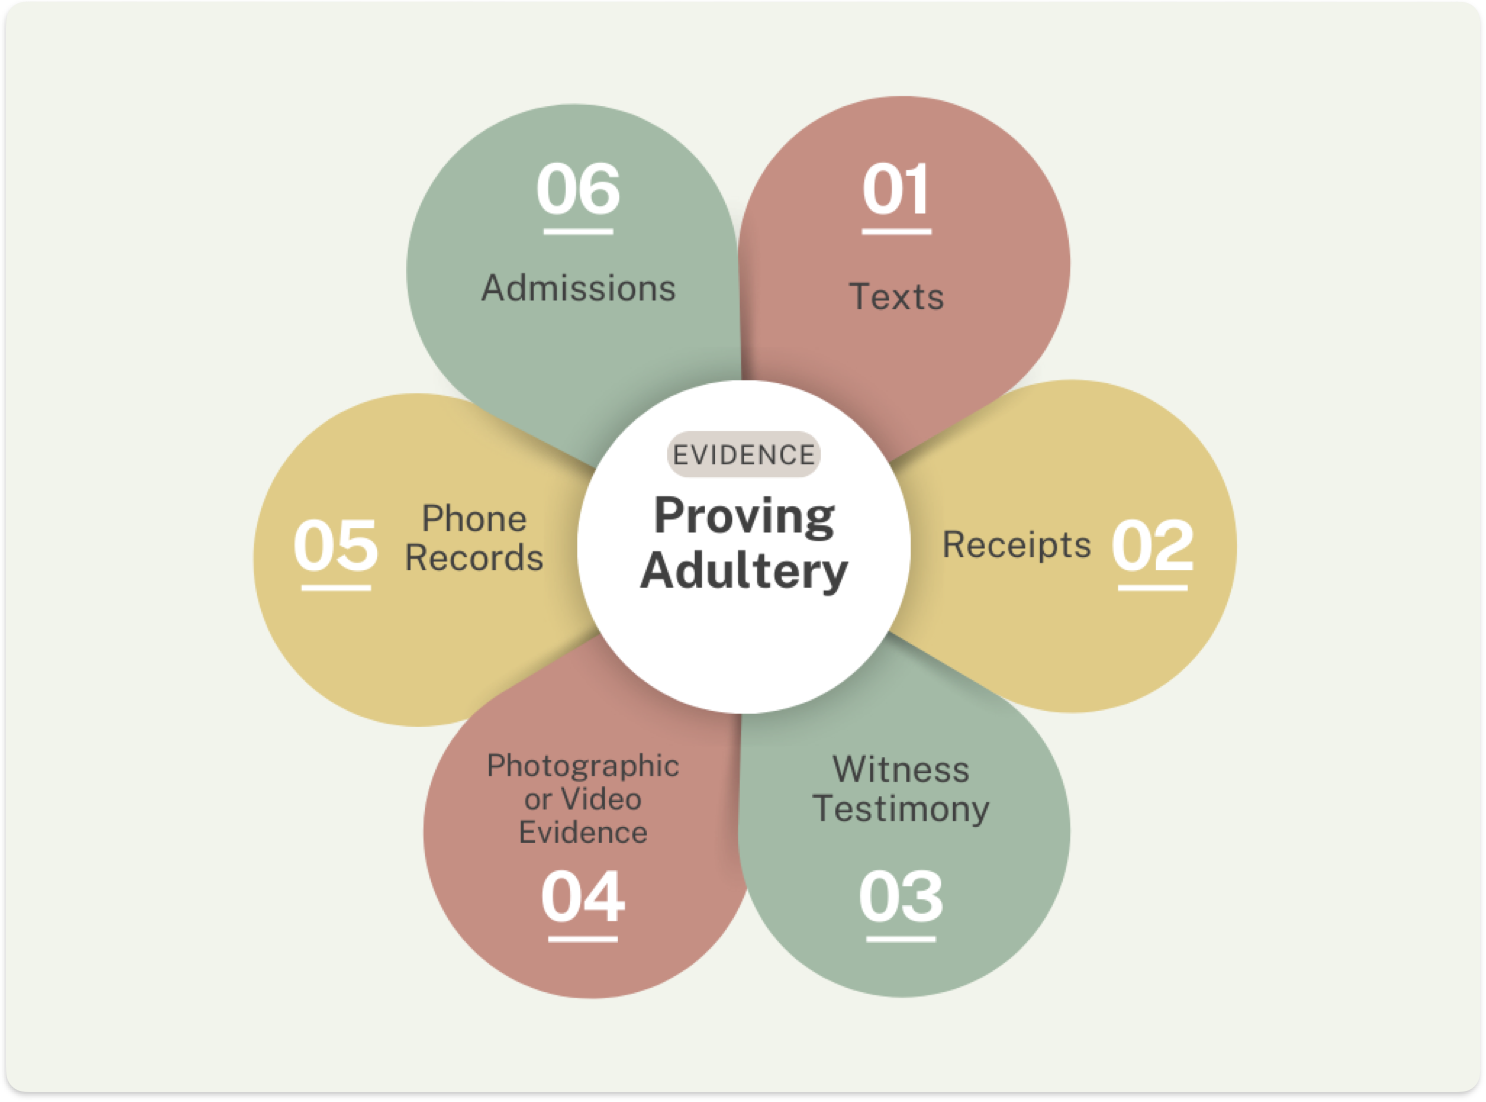 A flower-shaped infographic titled "Proving Adultery" with six labeled petals: Texts, Receipts, Witness Testimony, Photographic or Video Evidence, Phone Records, and Admissions. This visual aid simplifies the complex task of gathering evidence for a cheating divorce settlement.